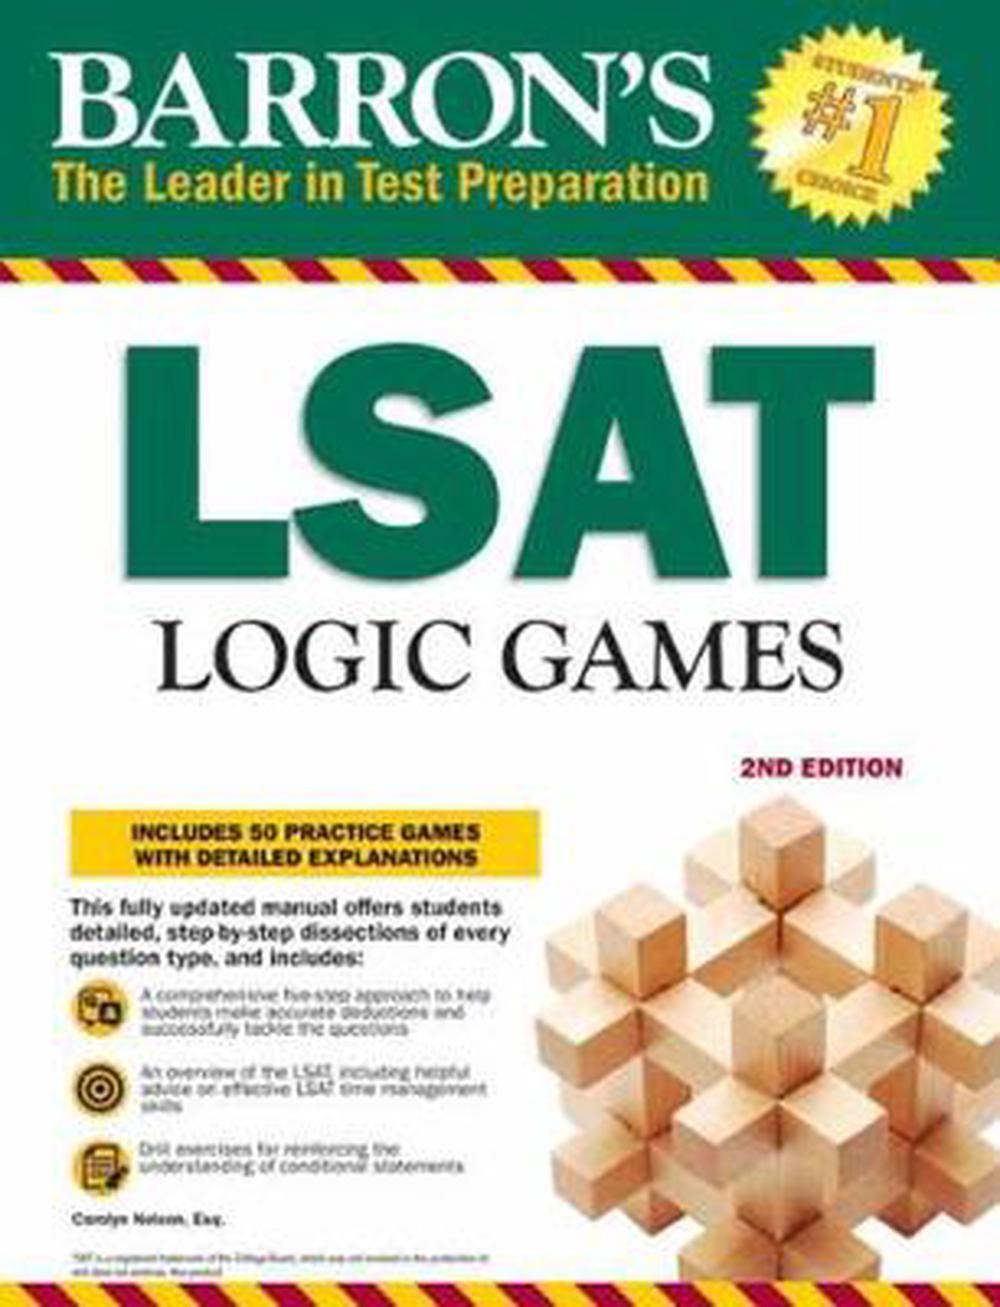 LSAT Logic Games Includes 50 Practice Games with Detailed Explanations